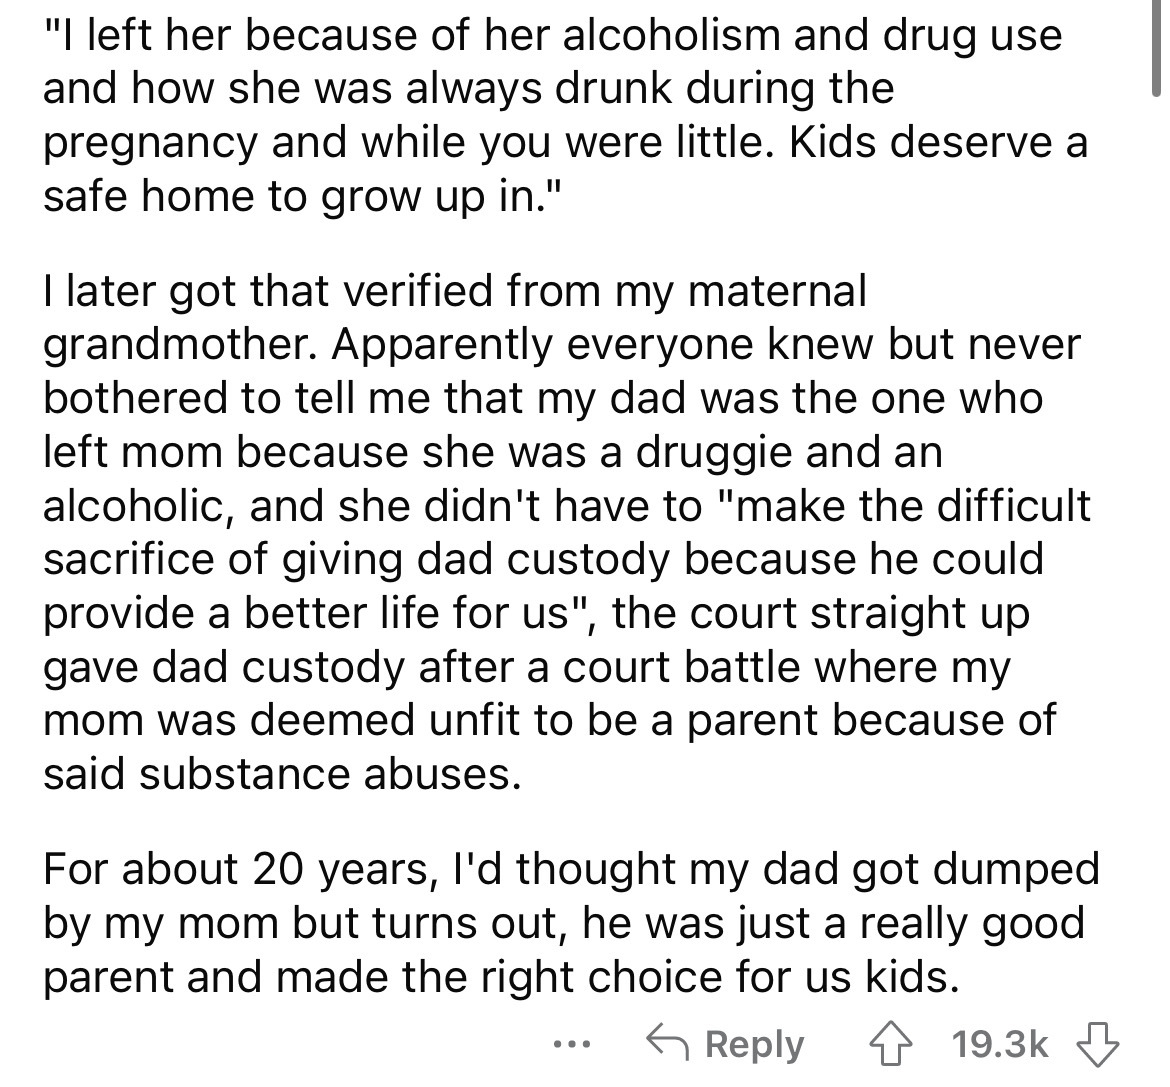 document - "I left her because of her alcoholism and drug use and how she was always drunk during the pregnancy and while you were little. Kids deserve a safe home to grow up in." I later got that verified from my maternal grandmother. Apparently everyone